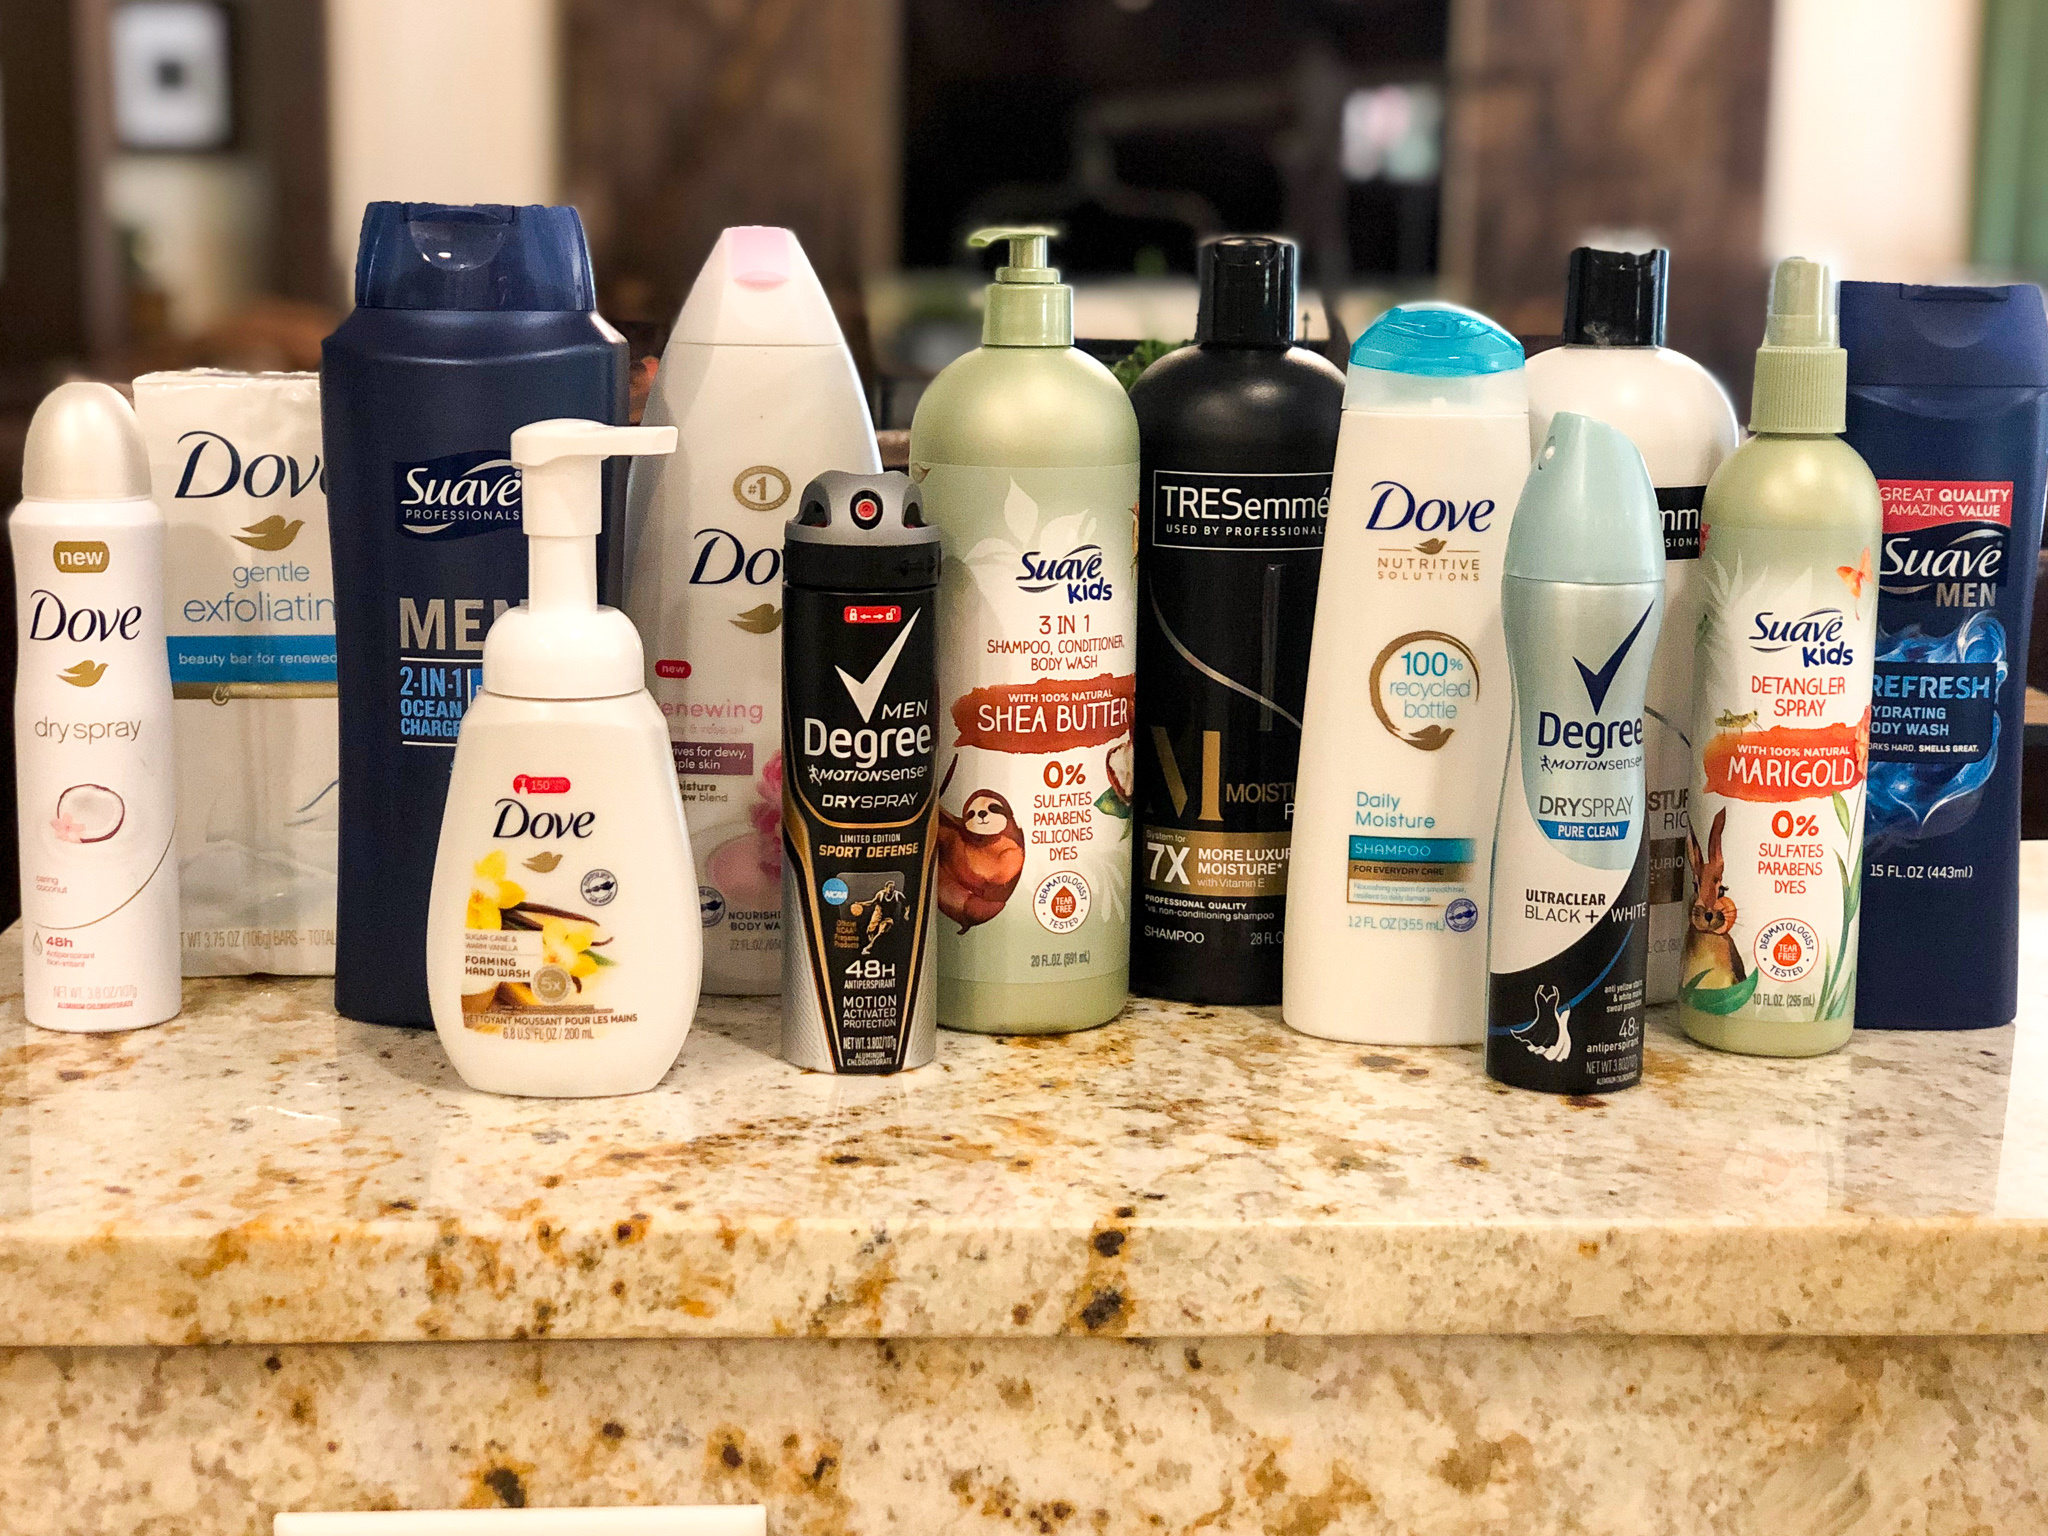 Look And Feel Your Best All Season Long - Pick Up Great Deals On Unilever Personal Care Products & Save Now At Publix on I Heart Publix 2